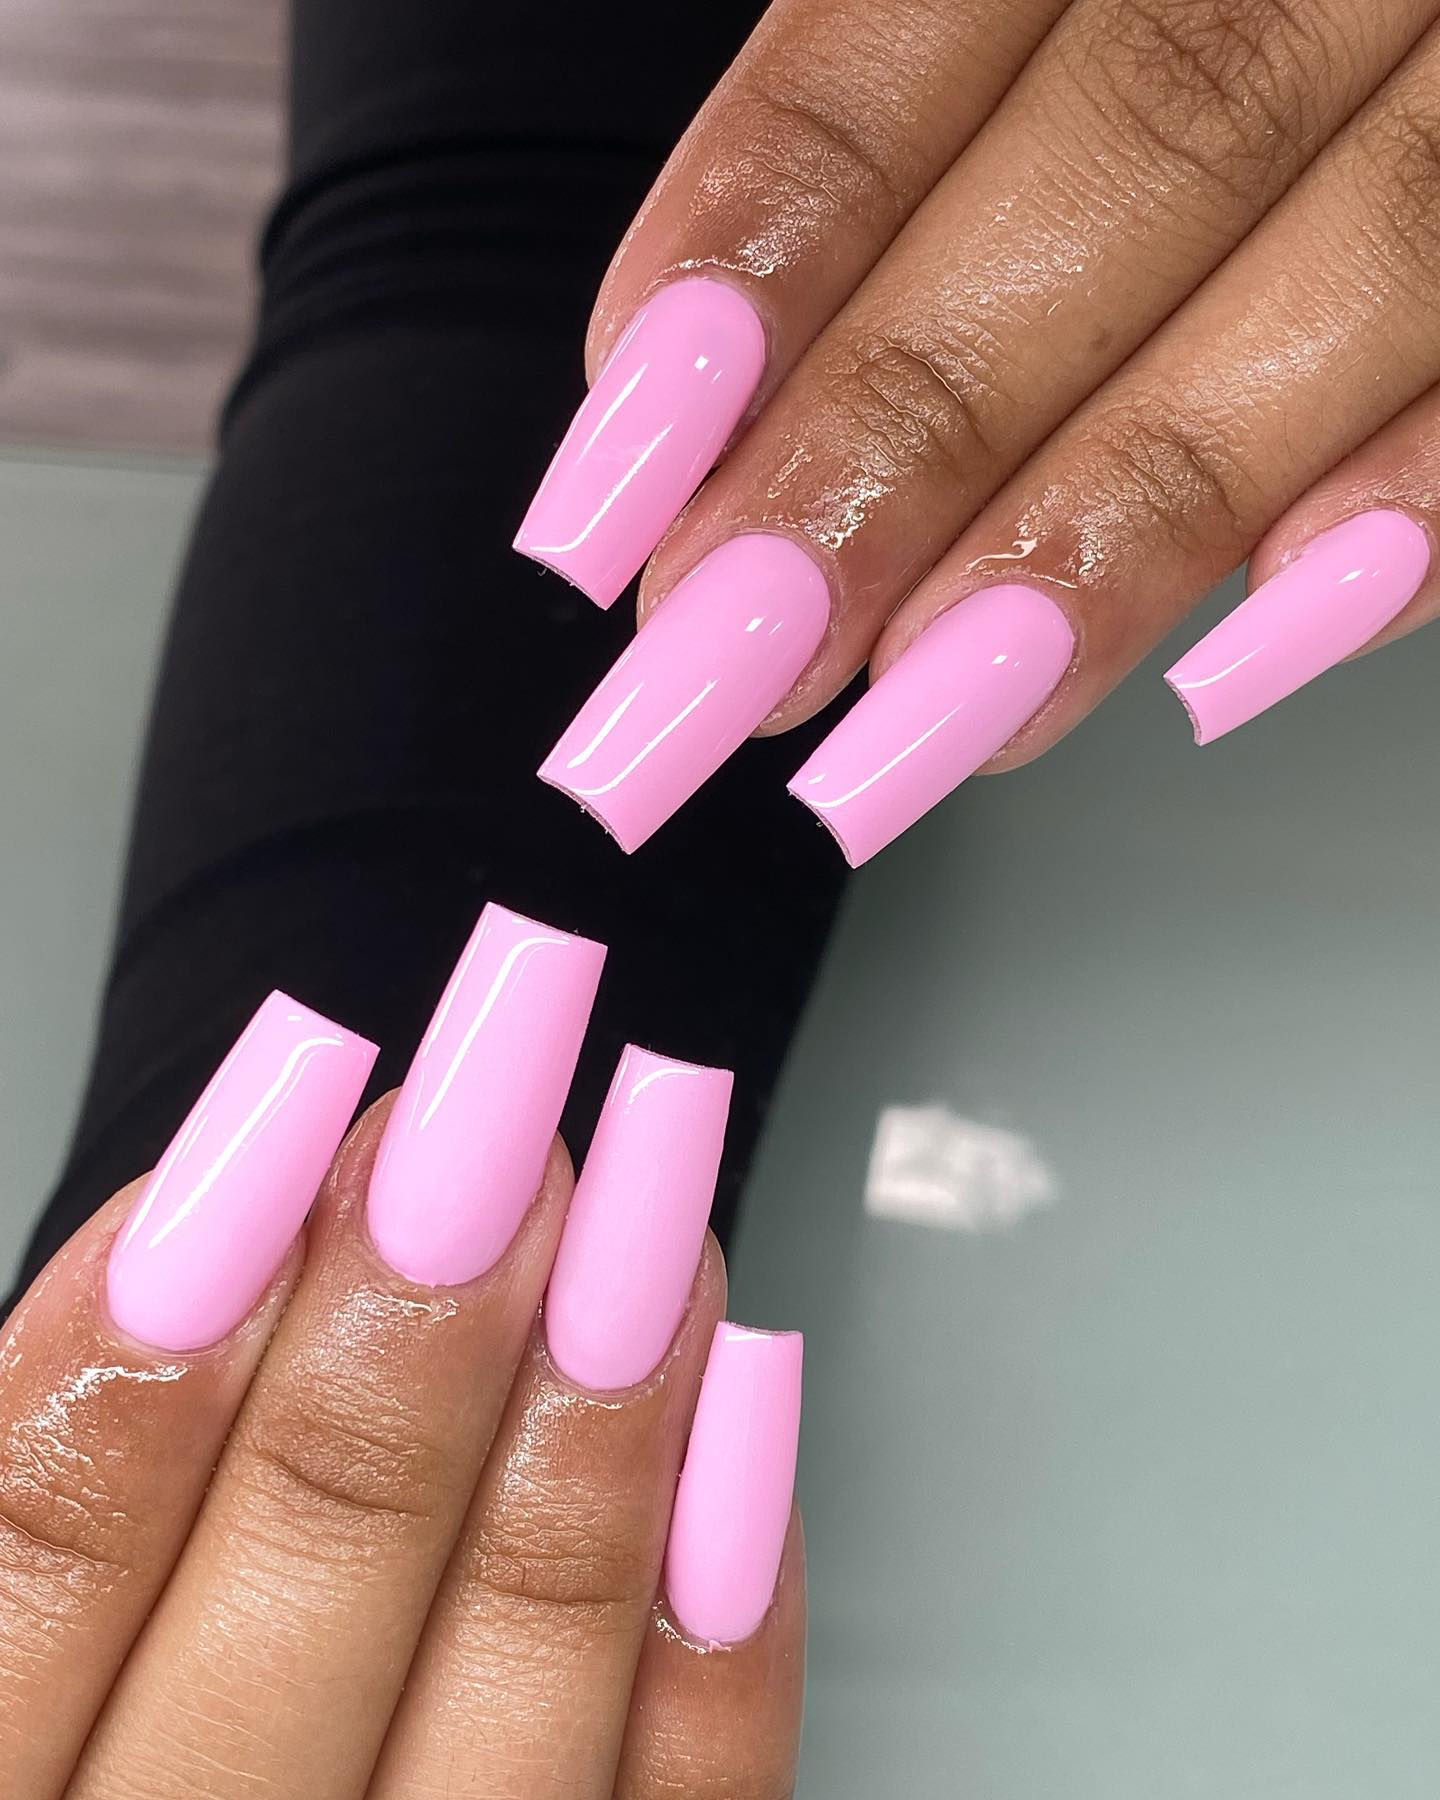 Bright pink Barbie nails are always in fashion! Barbie, are you ready to party?!